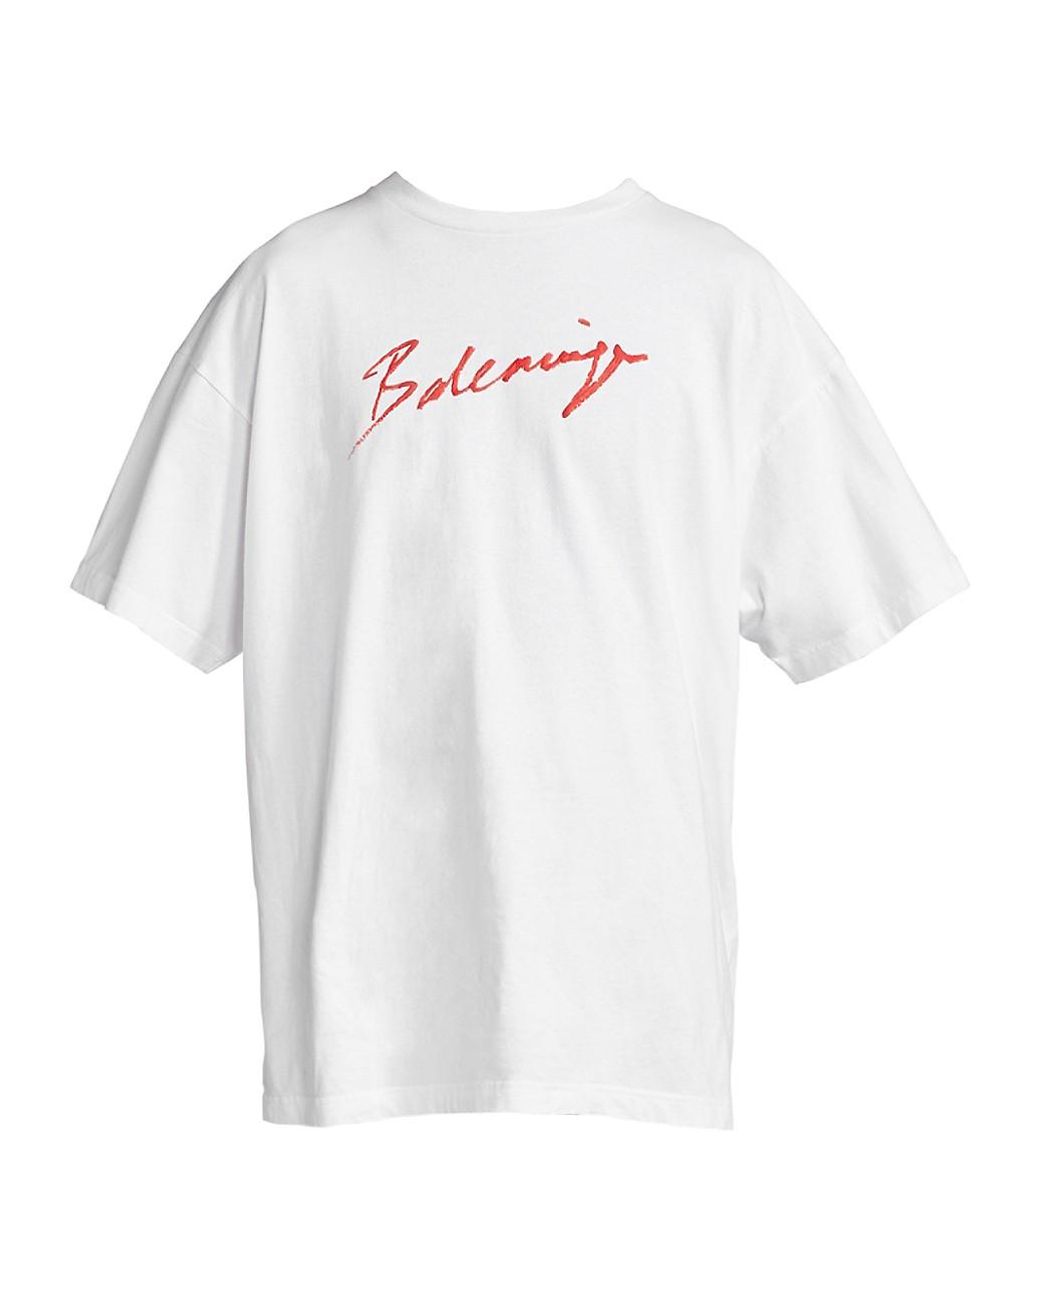 Fascinate rim værdighed Balenciaga Cursive Graphic T-shirt in White for Men | Lyst